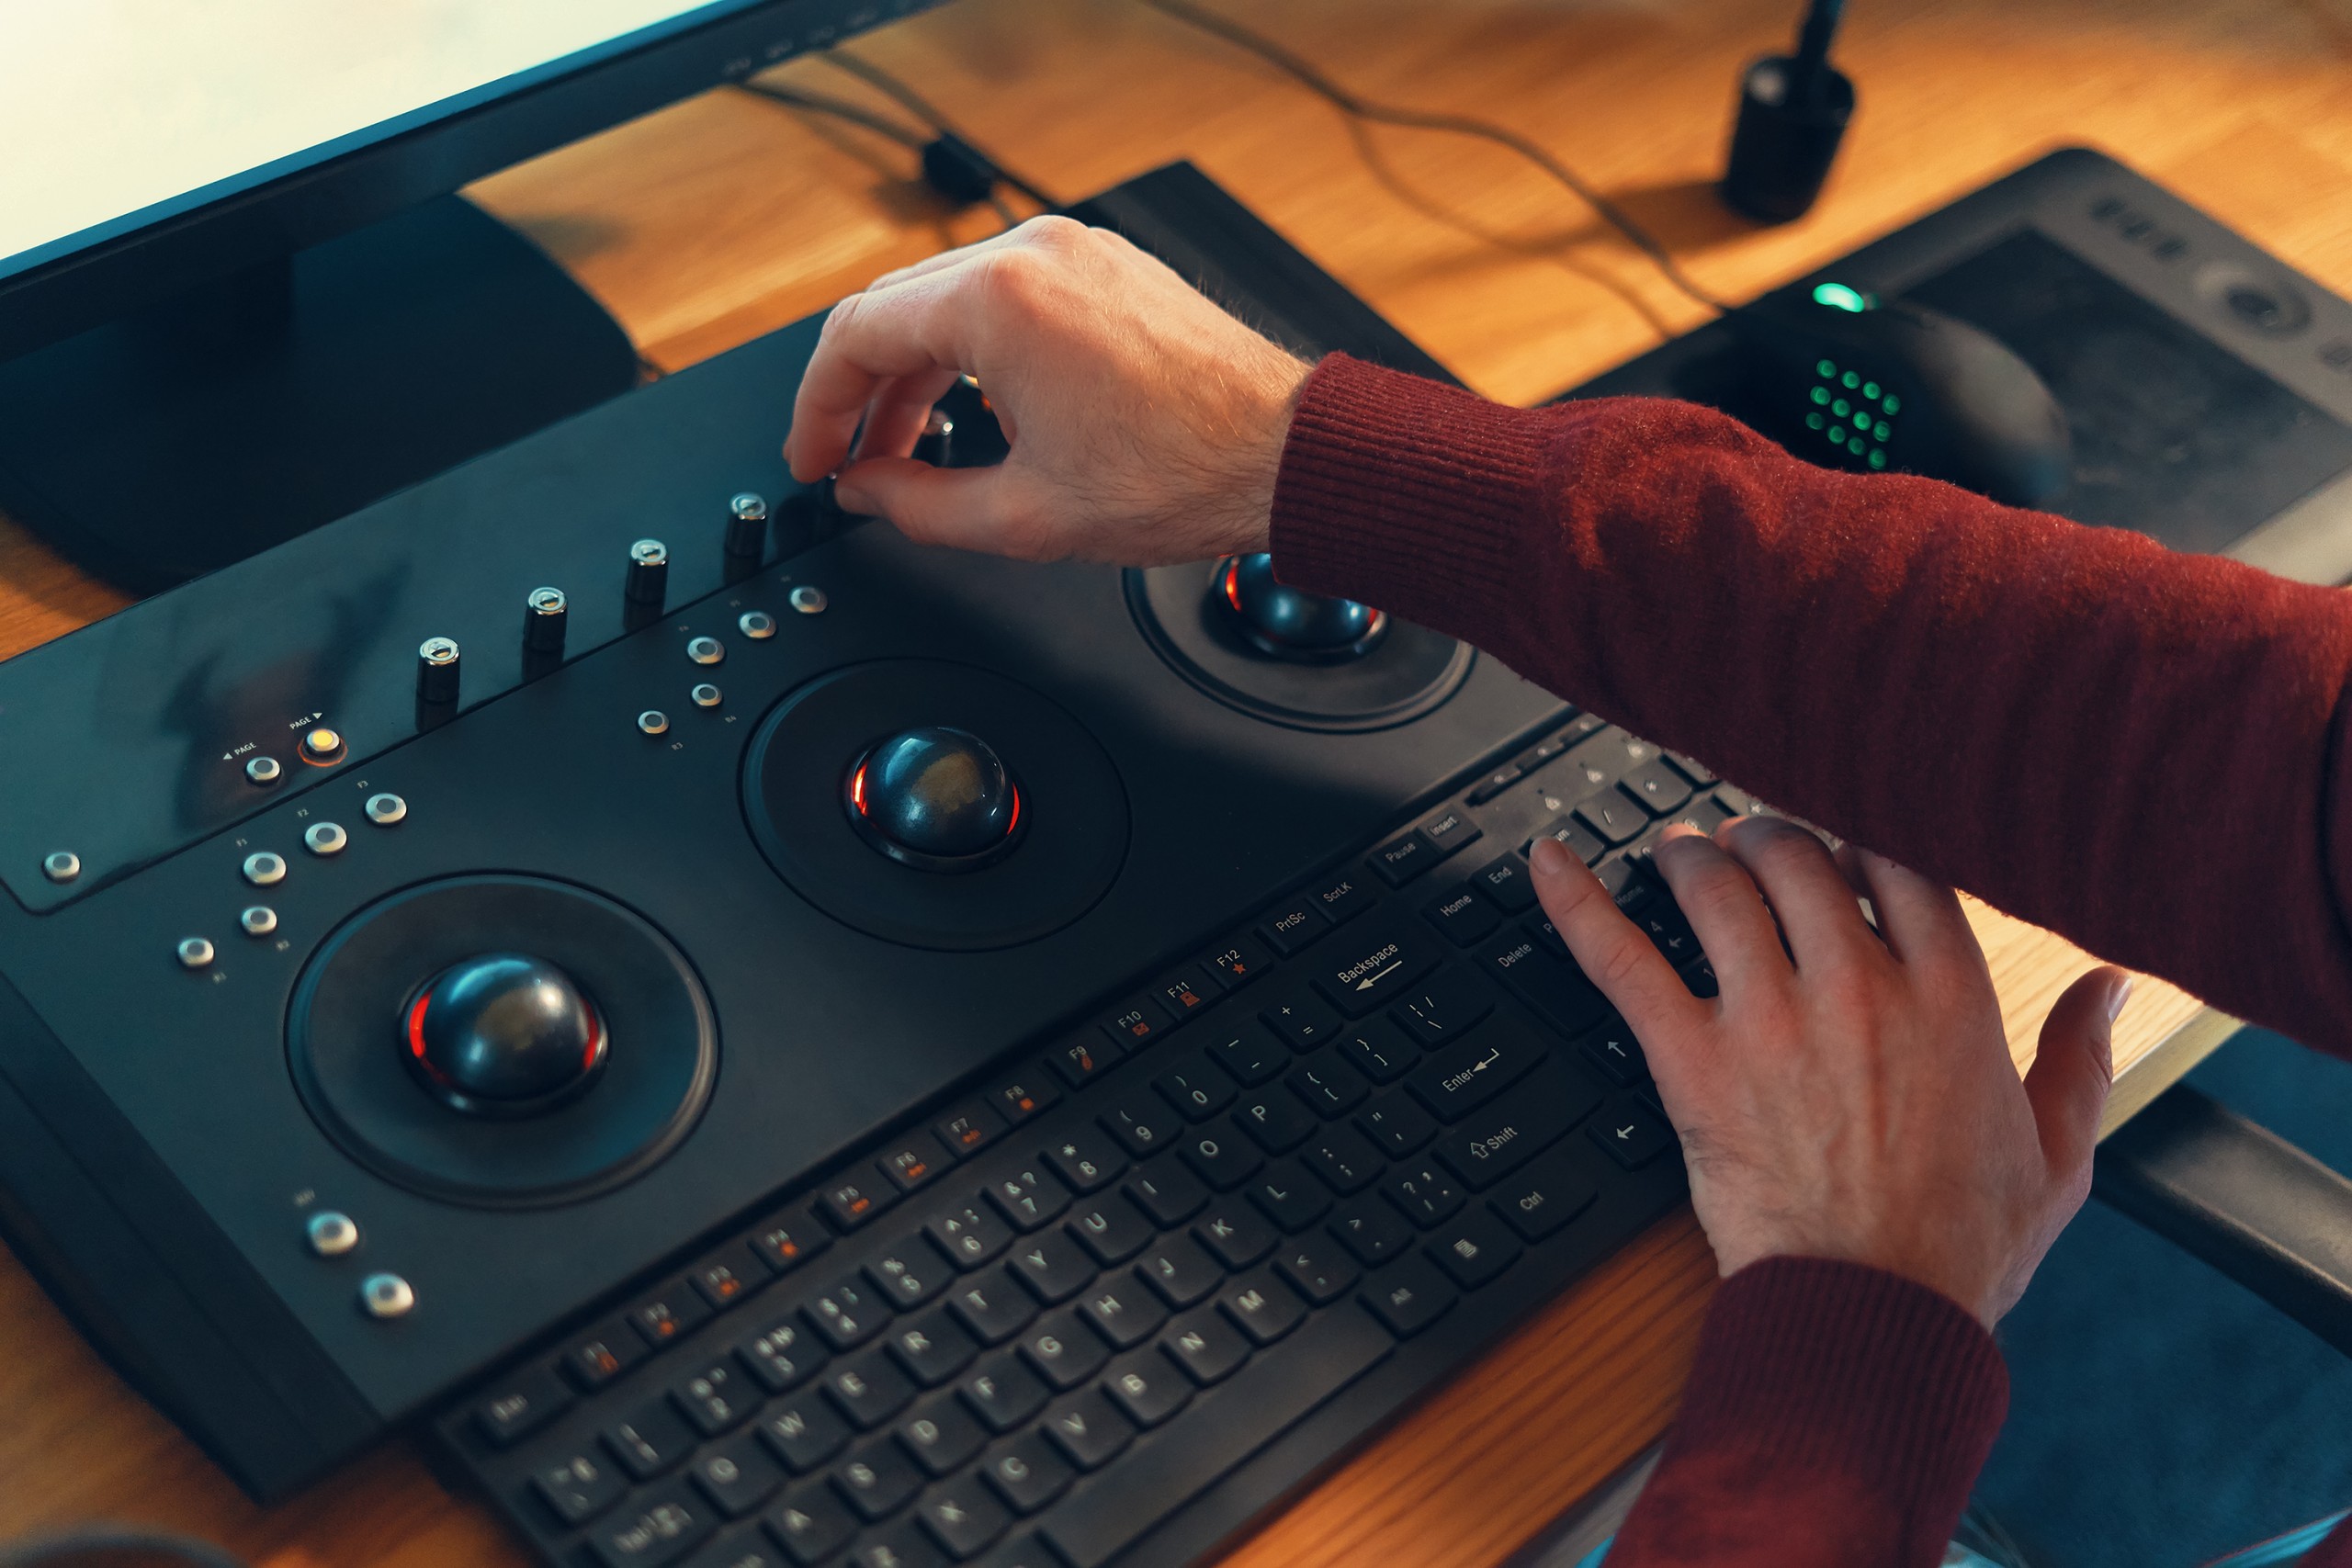 Video editor hands adjusting color or sound on working console machine in the post production stage.